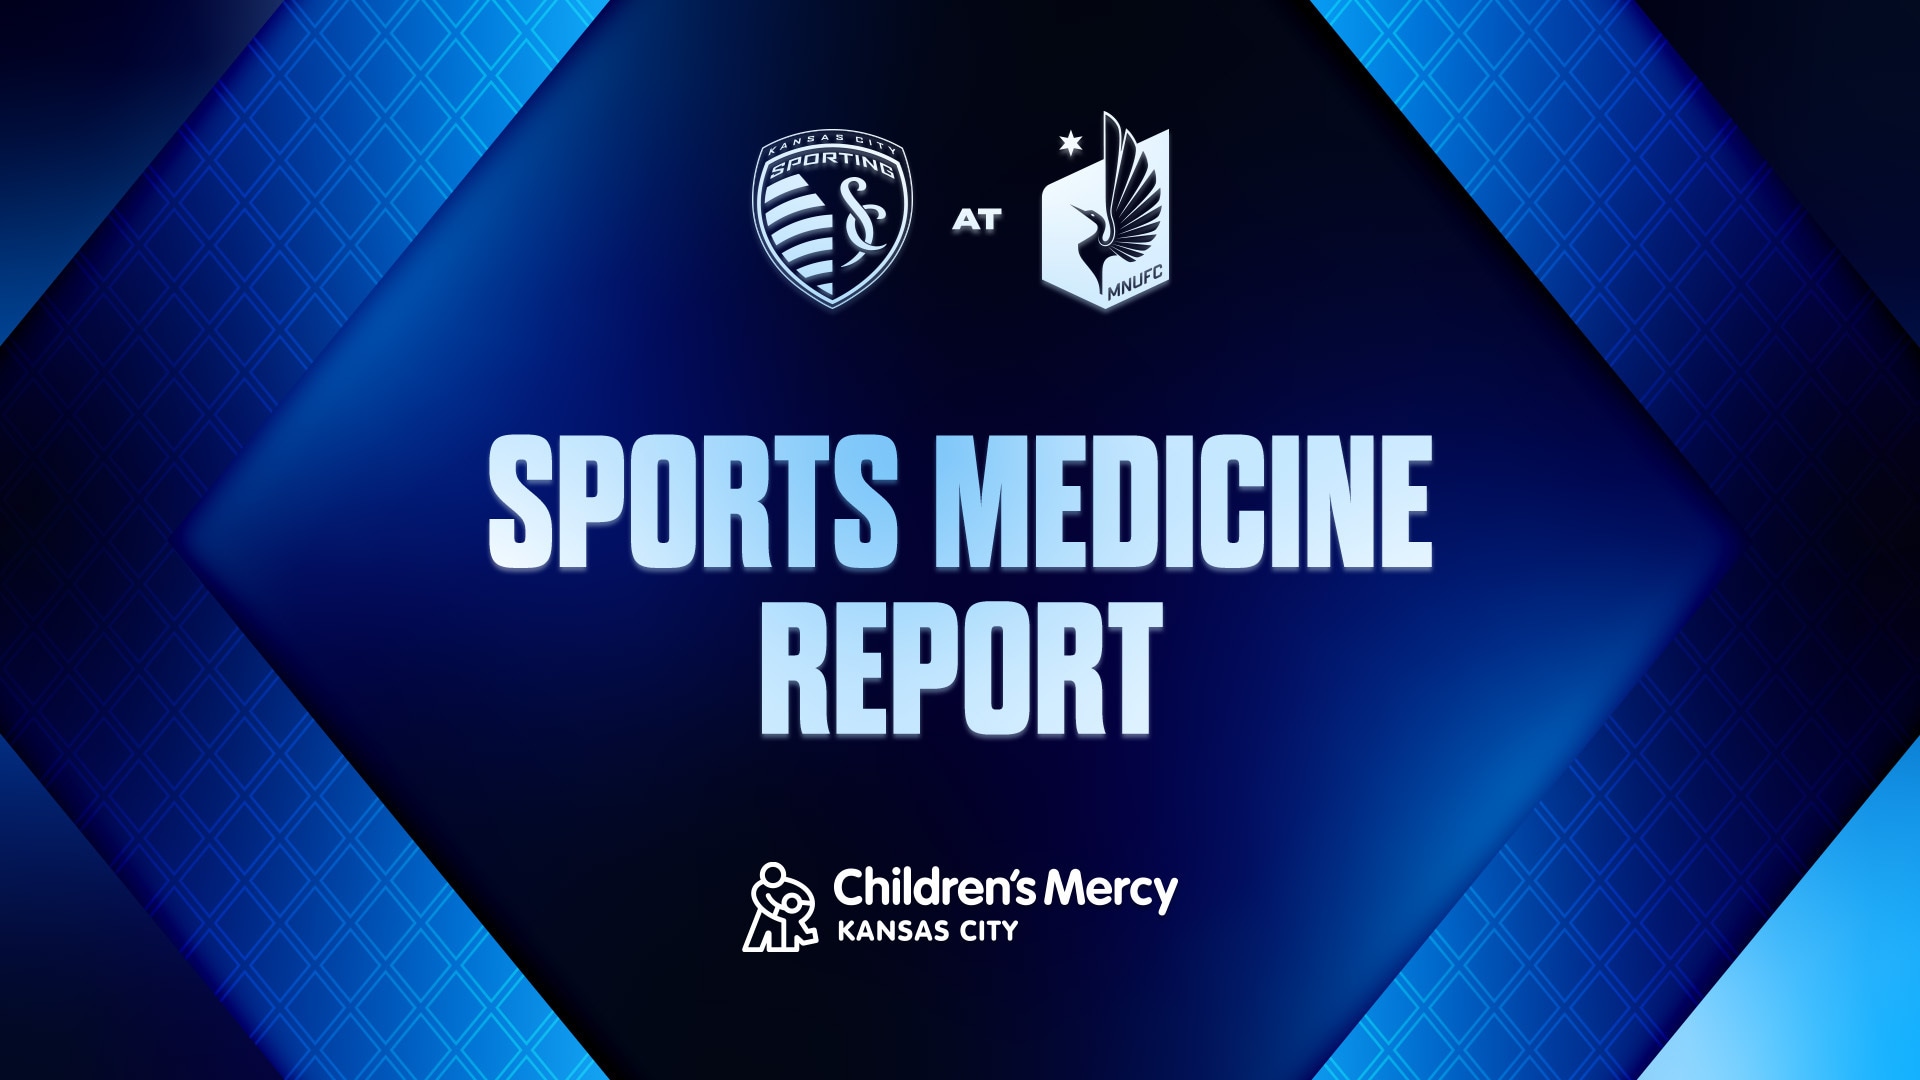 Sporting KC Health Update and Match Preview for Upcoming Game Against Minnesota United FC